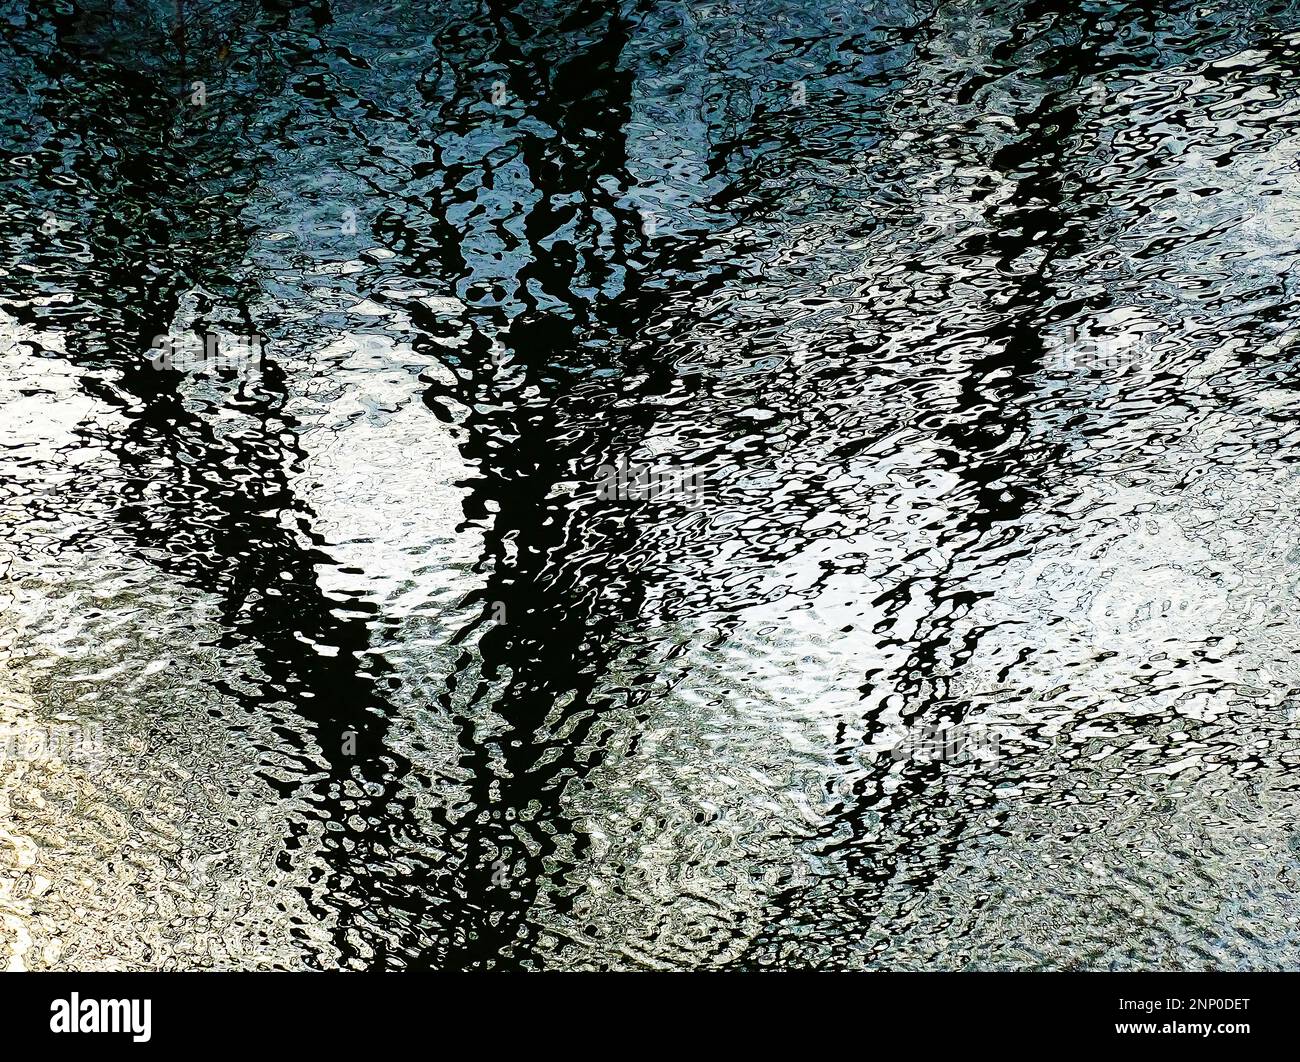 Abstract photograph of ripples and reflections in water Stock Photo